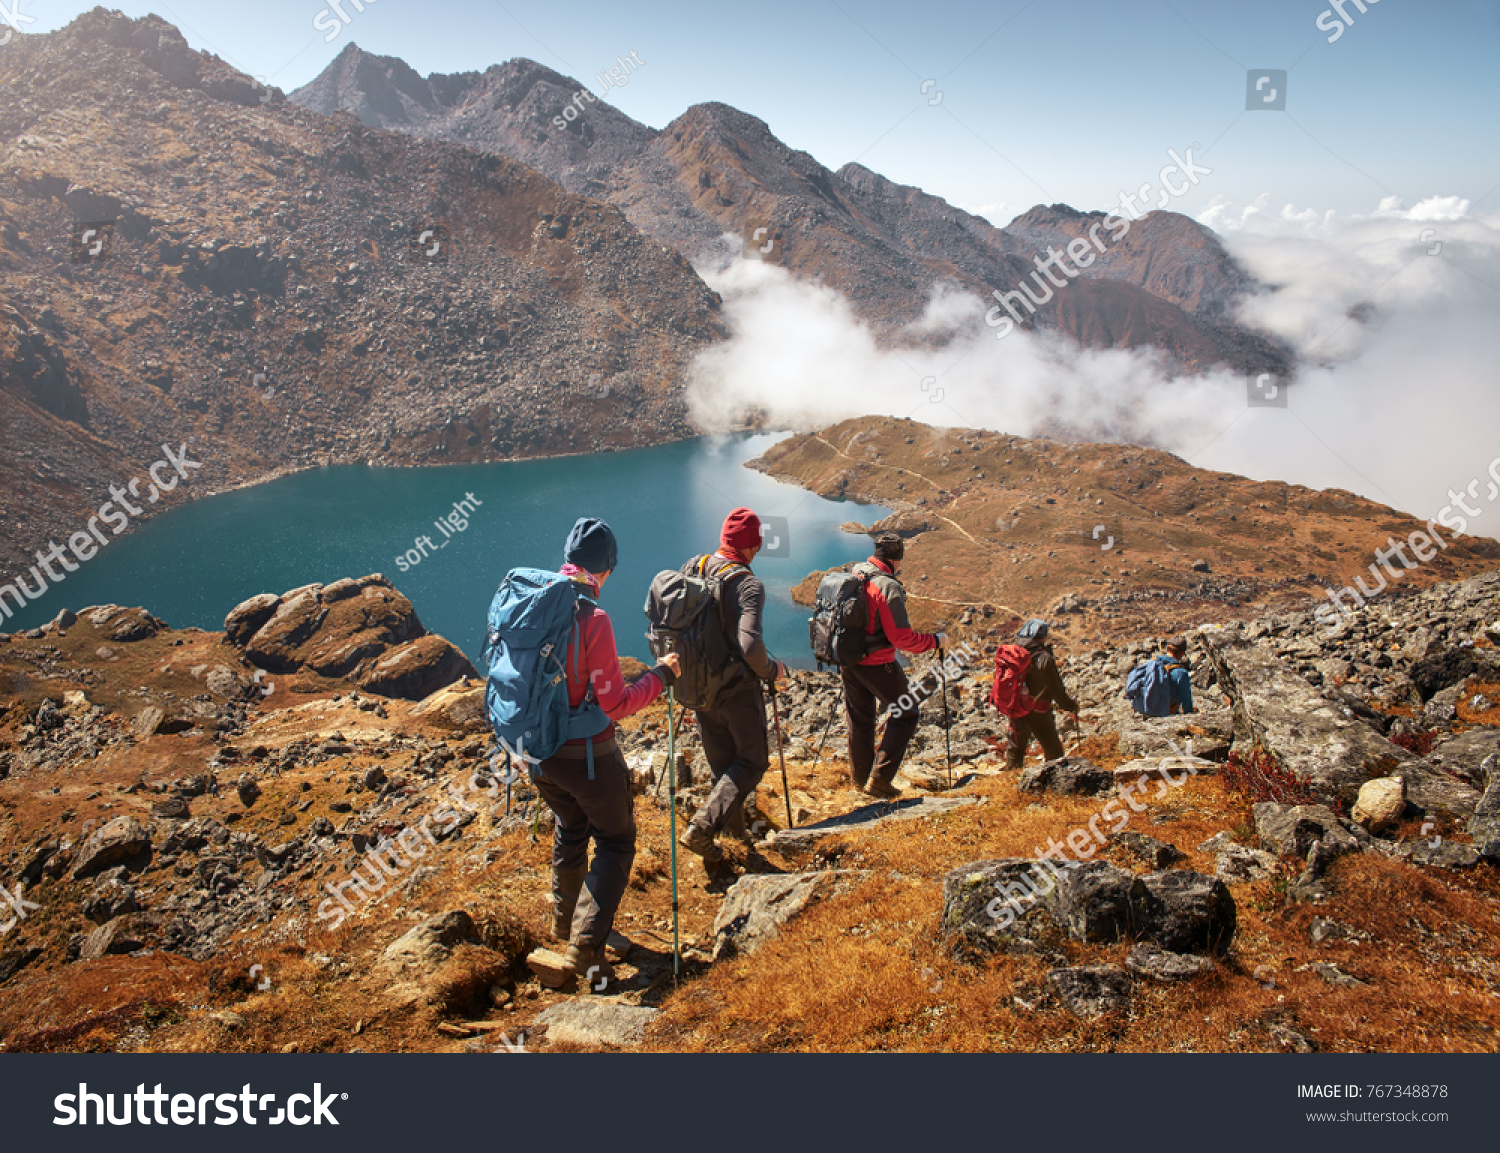 Group of tourists with backpacks descends down mountain trail to lake during a hike in the national park Lantang, Nepal.
Beautiful inspirational landscape, trekking and activity. #767348878